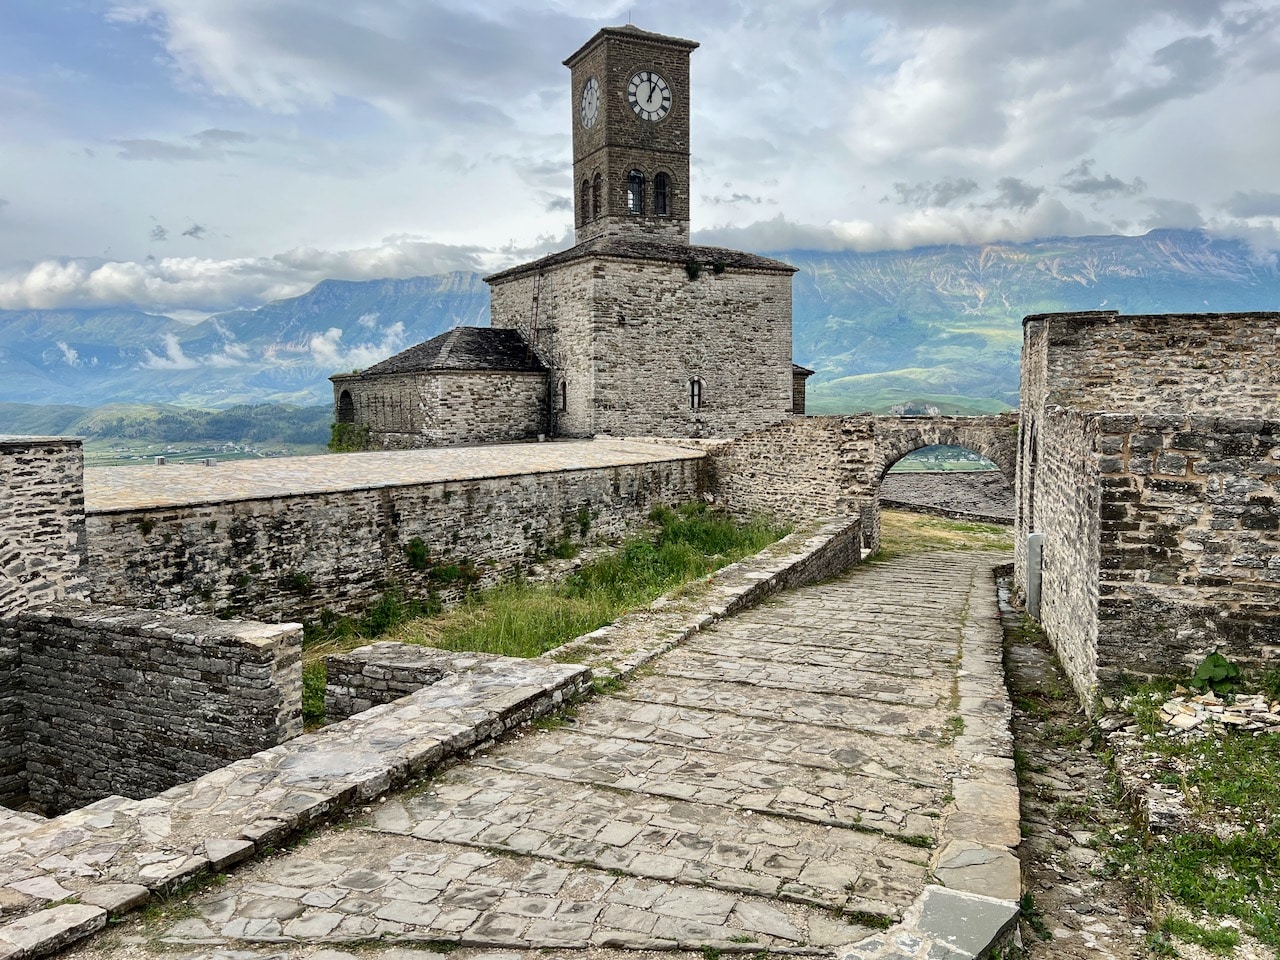 A highlight of any Albania Road Trip is an overnight stay at the UNESCO Castle of Gjirokastra.